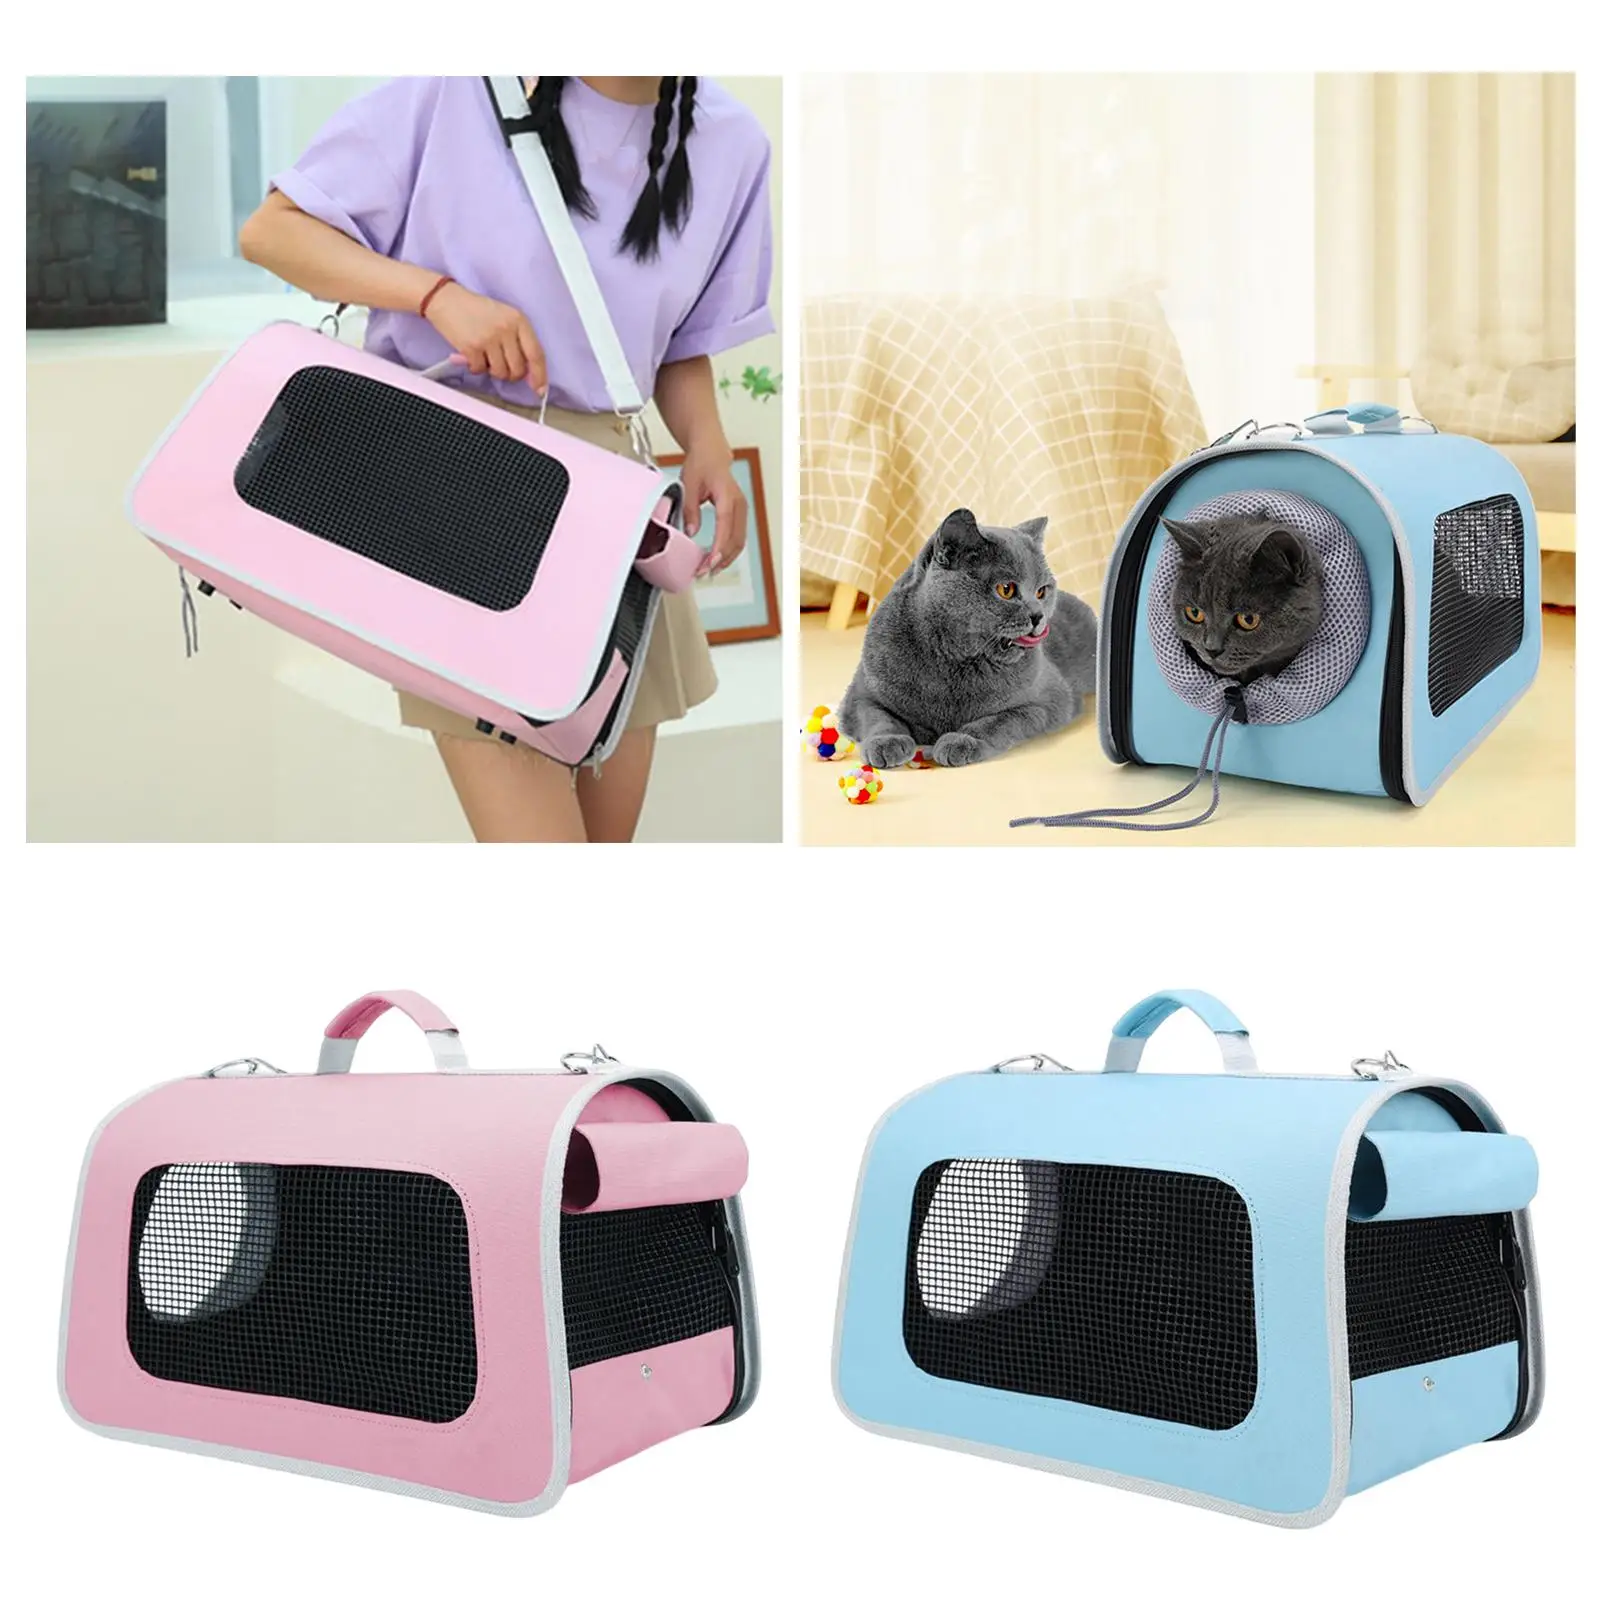 Portable Cat Carrier Pet Carrier Shoulder Bag Breathable Lightweight Carrying Pet Cage for Travelling Outdoor Puppies Cats